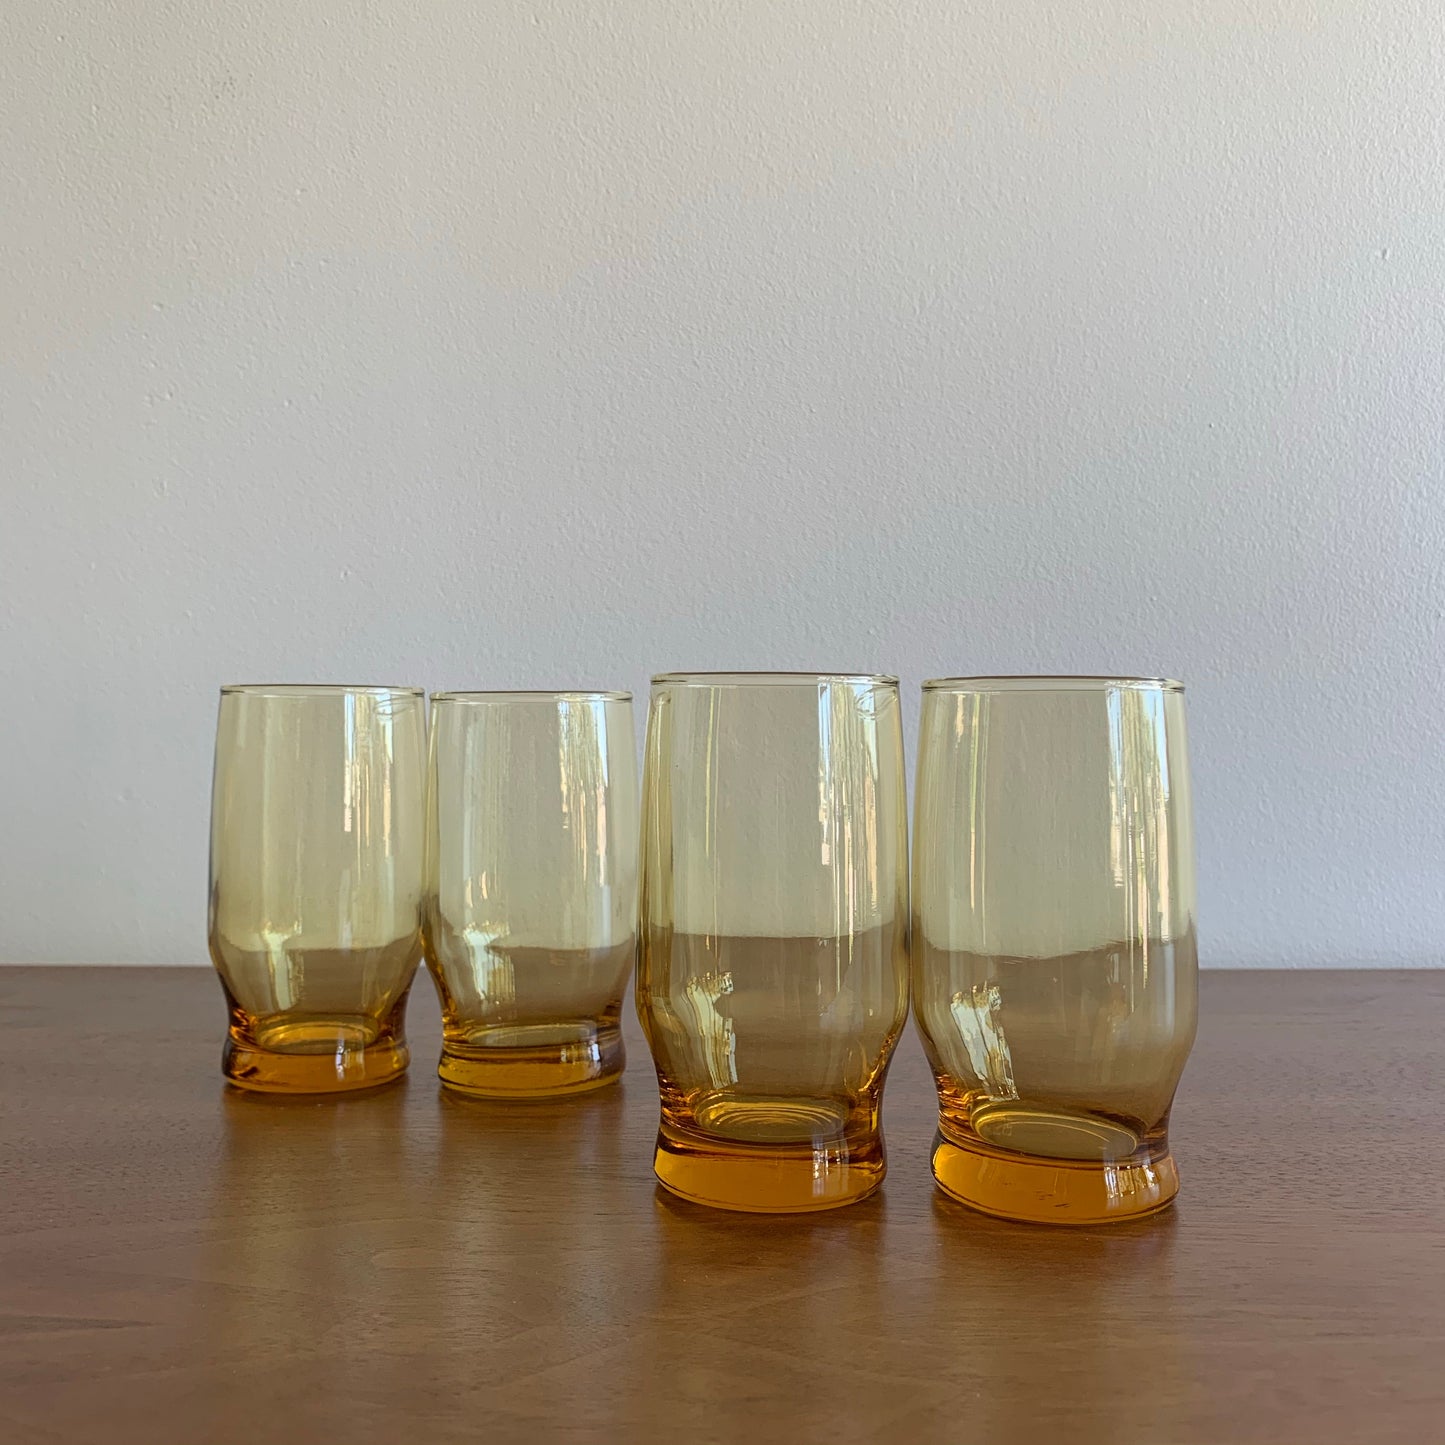 Set of 4 Small Vintage Amber Glasses